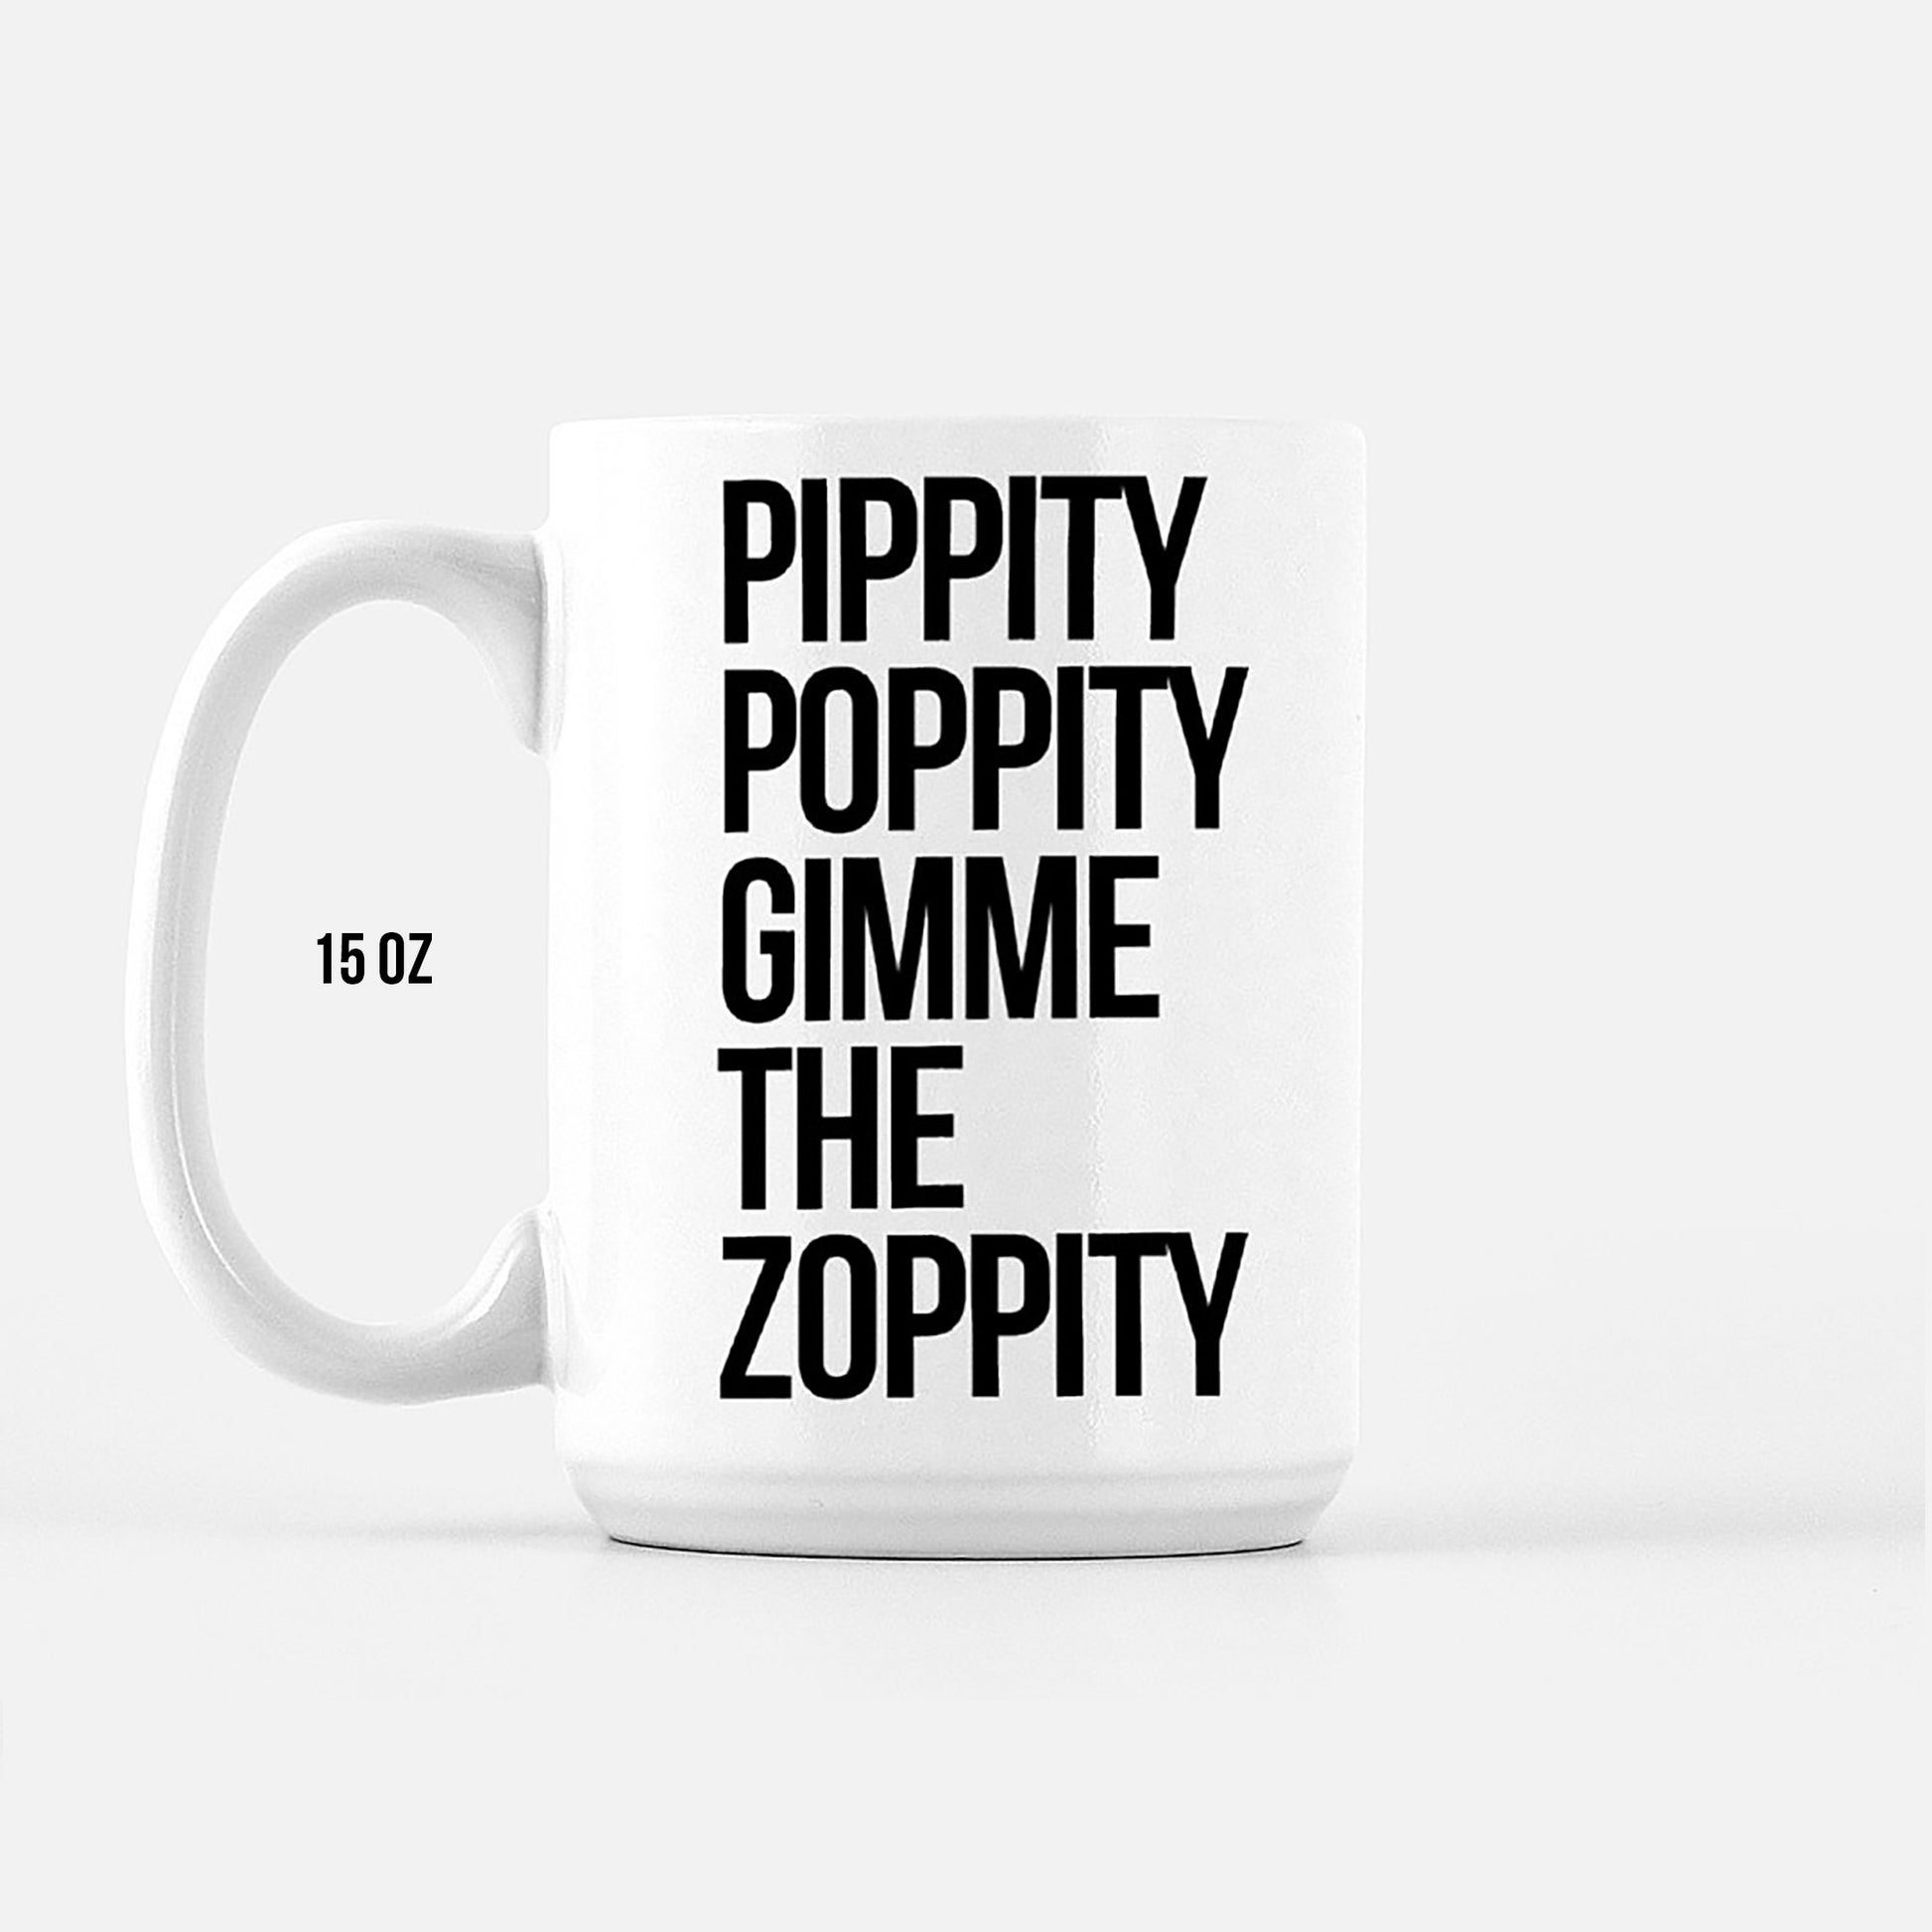 The Office TV show mug featuring quote from Michael Scott (Steve Carell) with quote, "Pippity poppity gimme the zoppity"